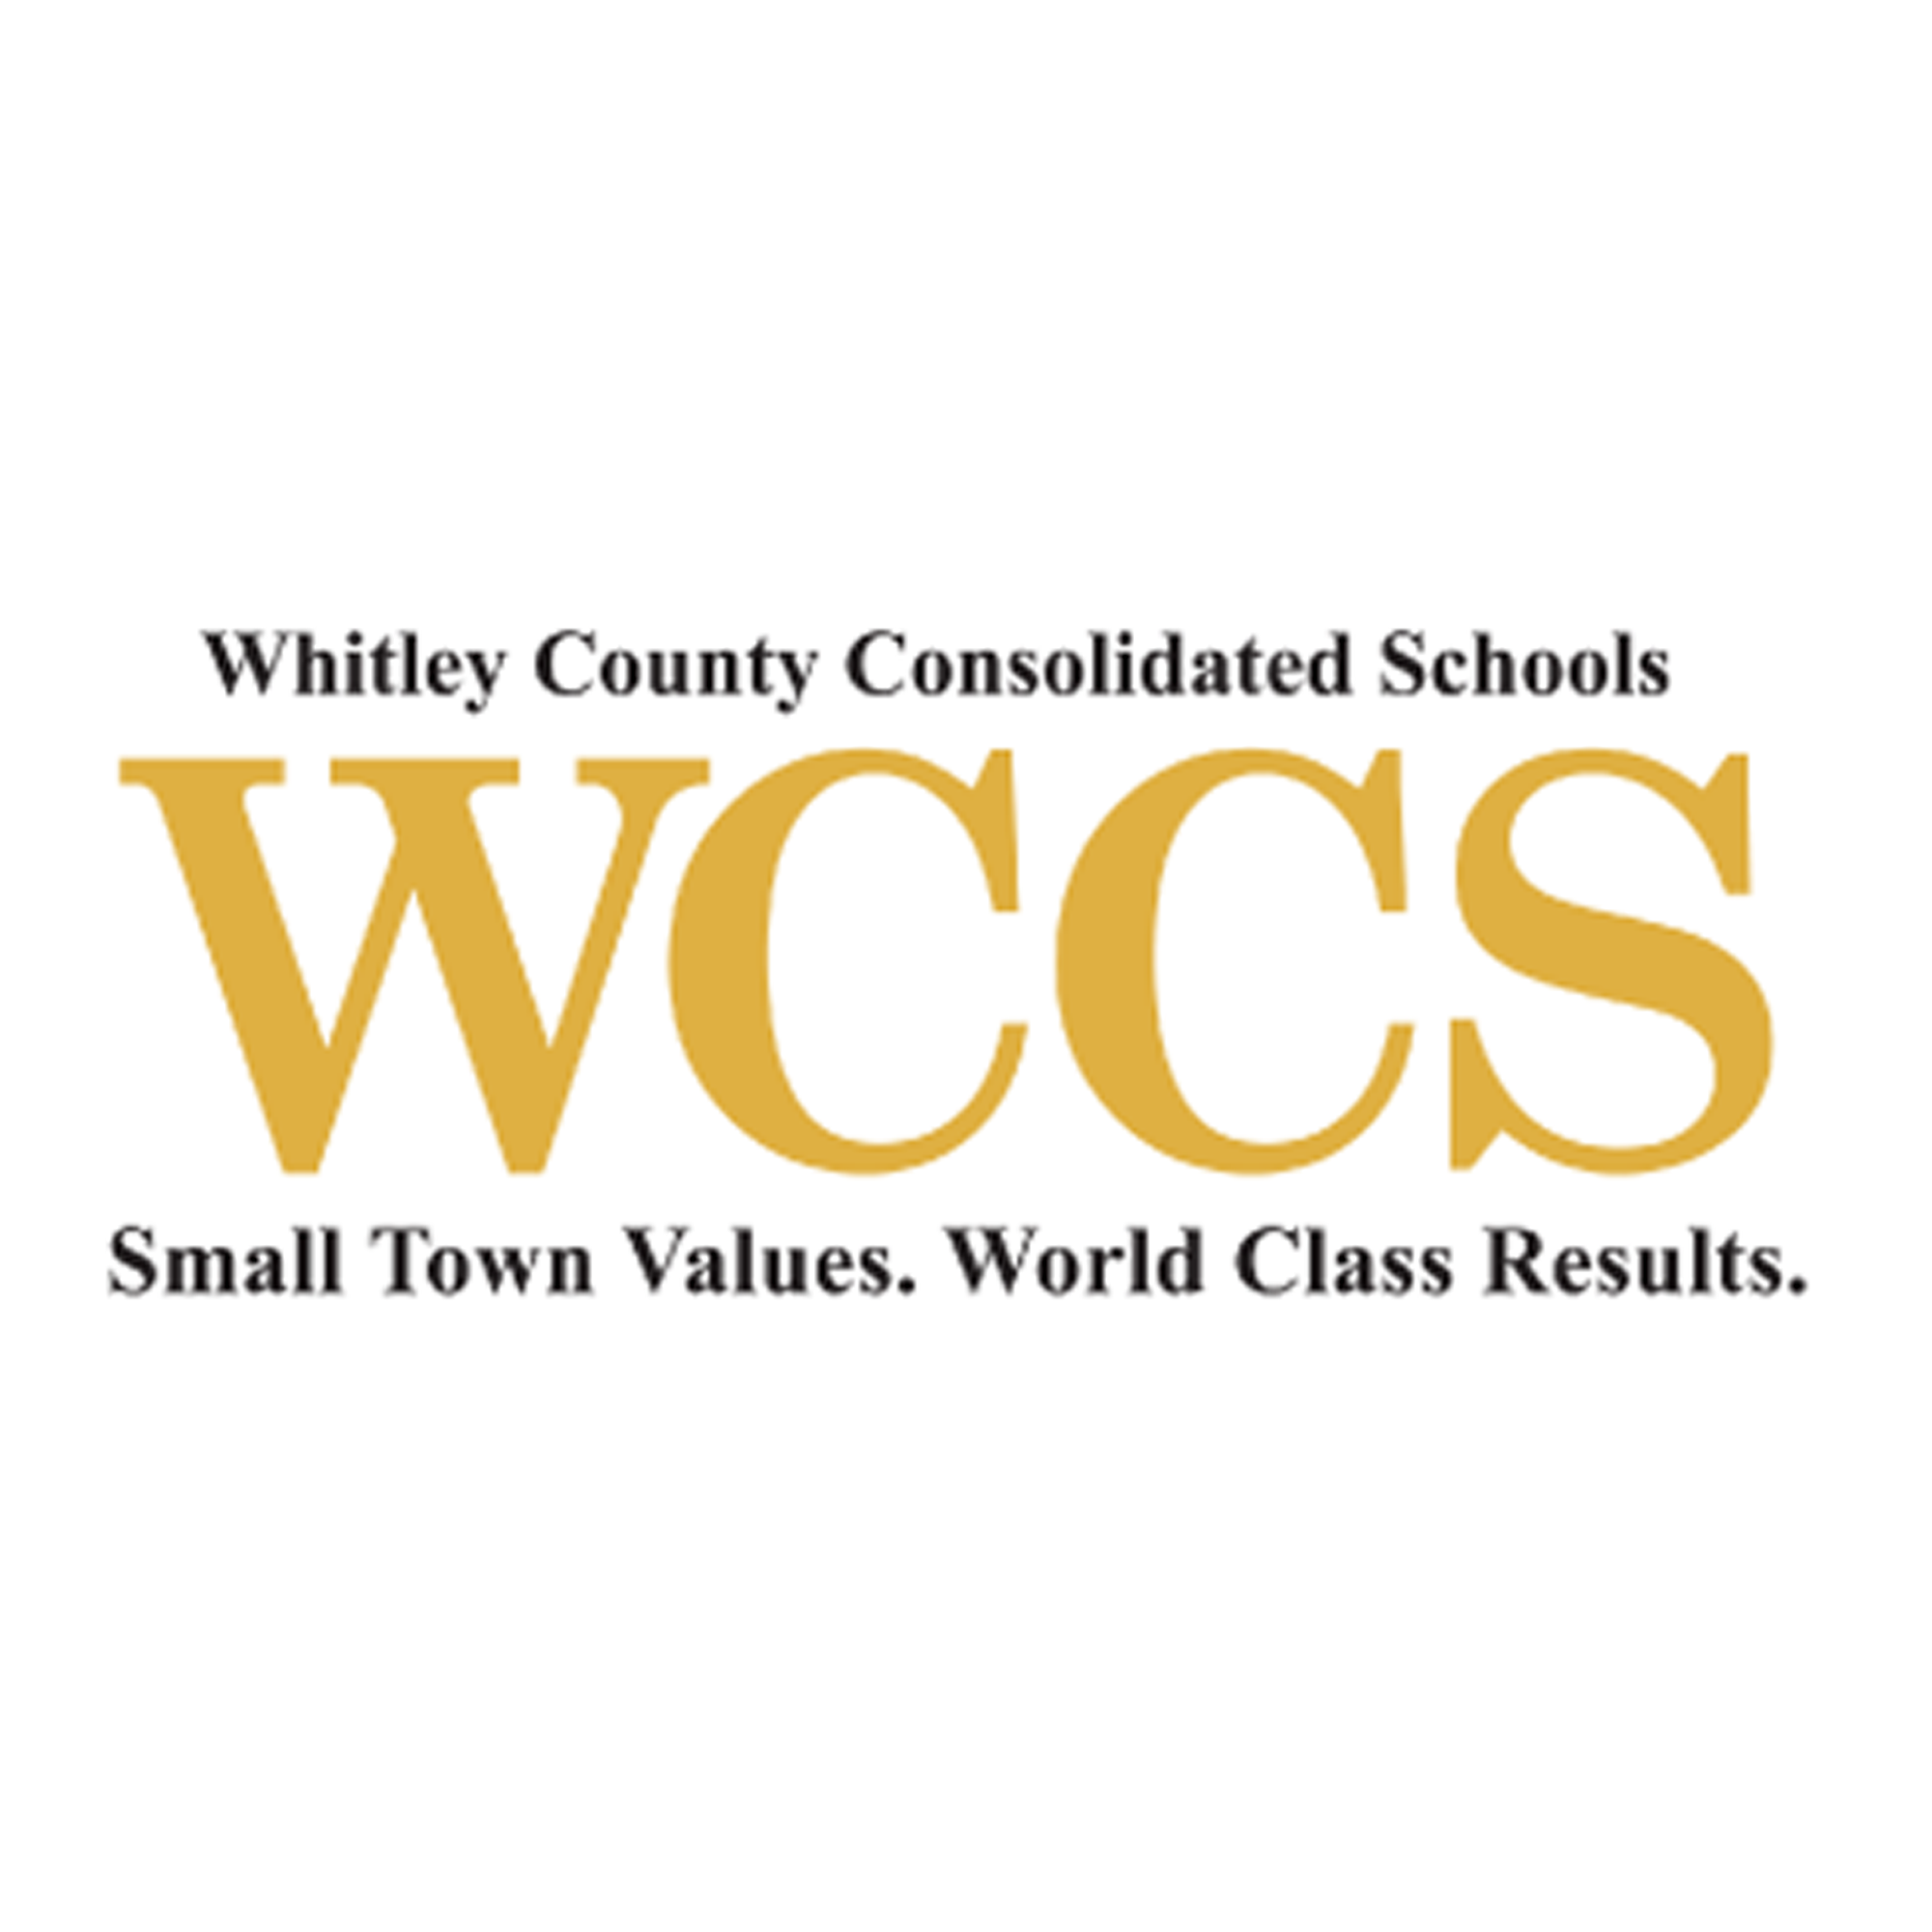 Whitley County Consolidated Schools